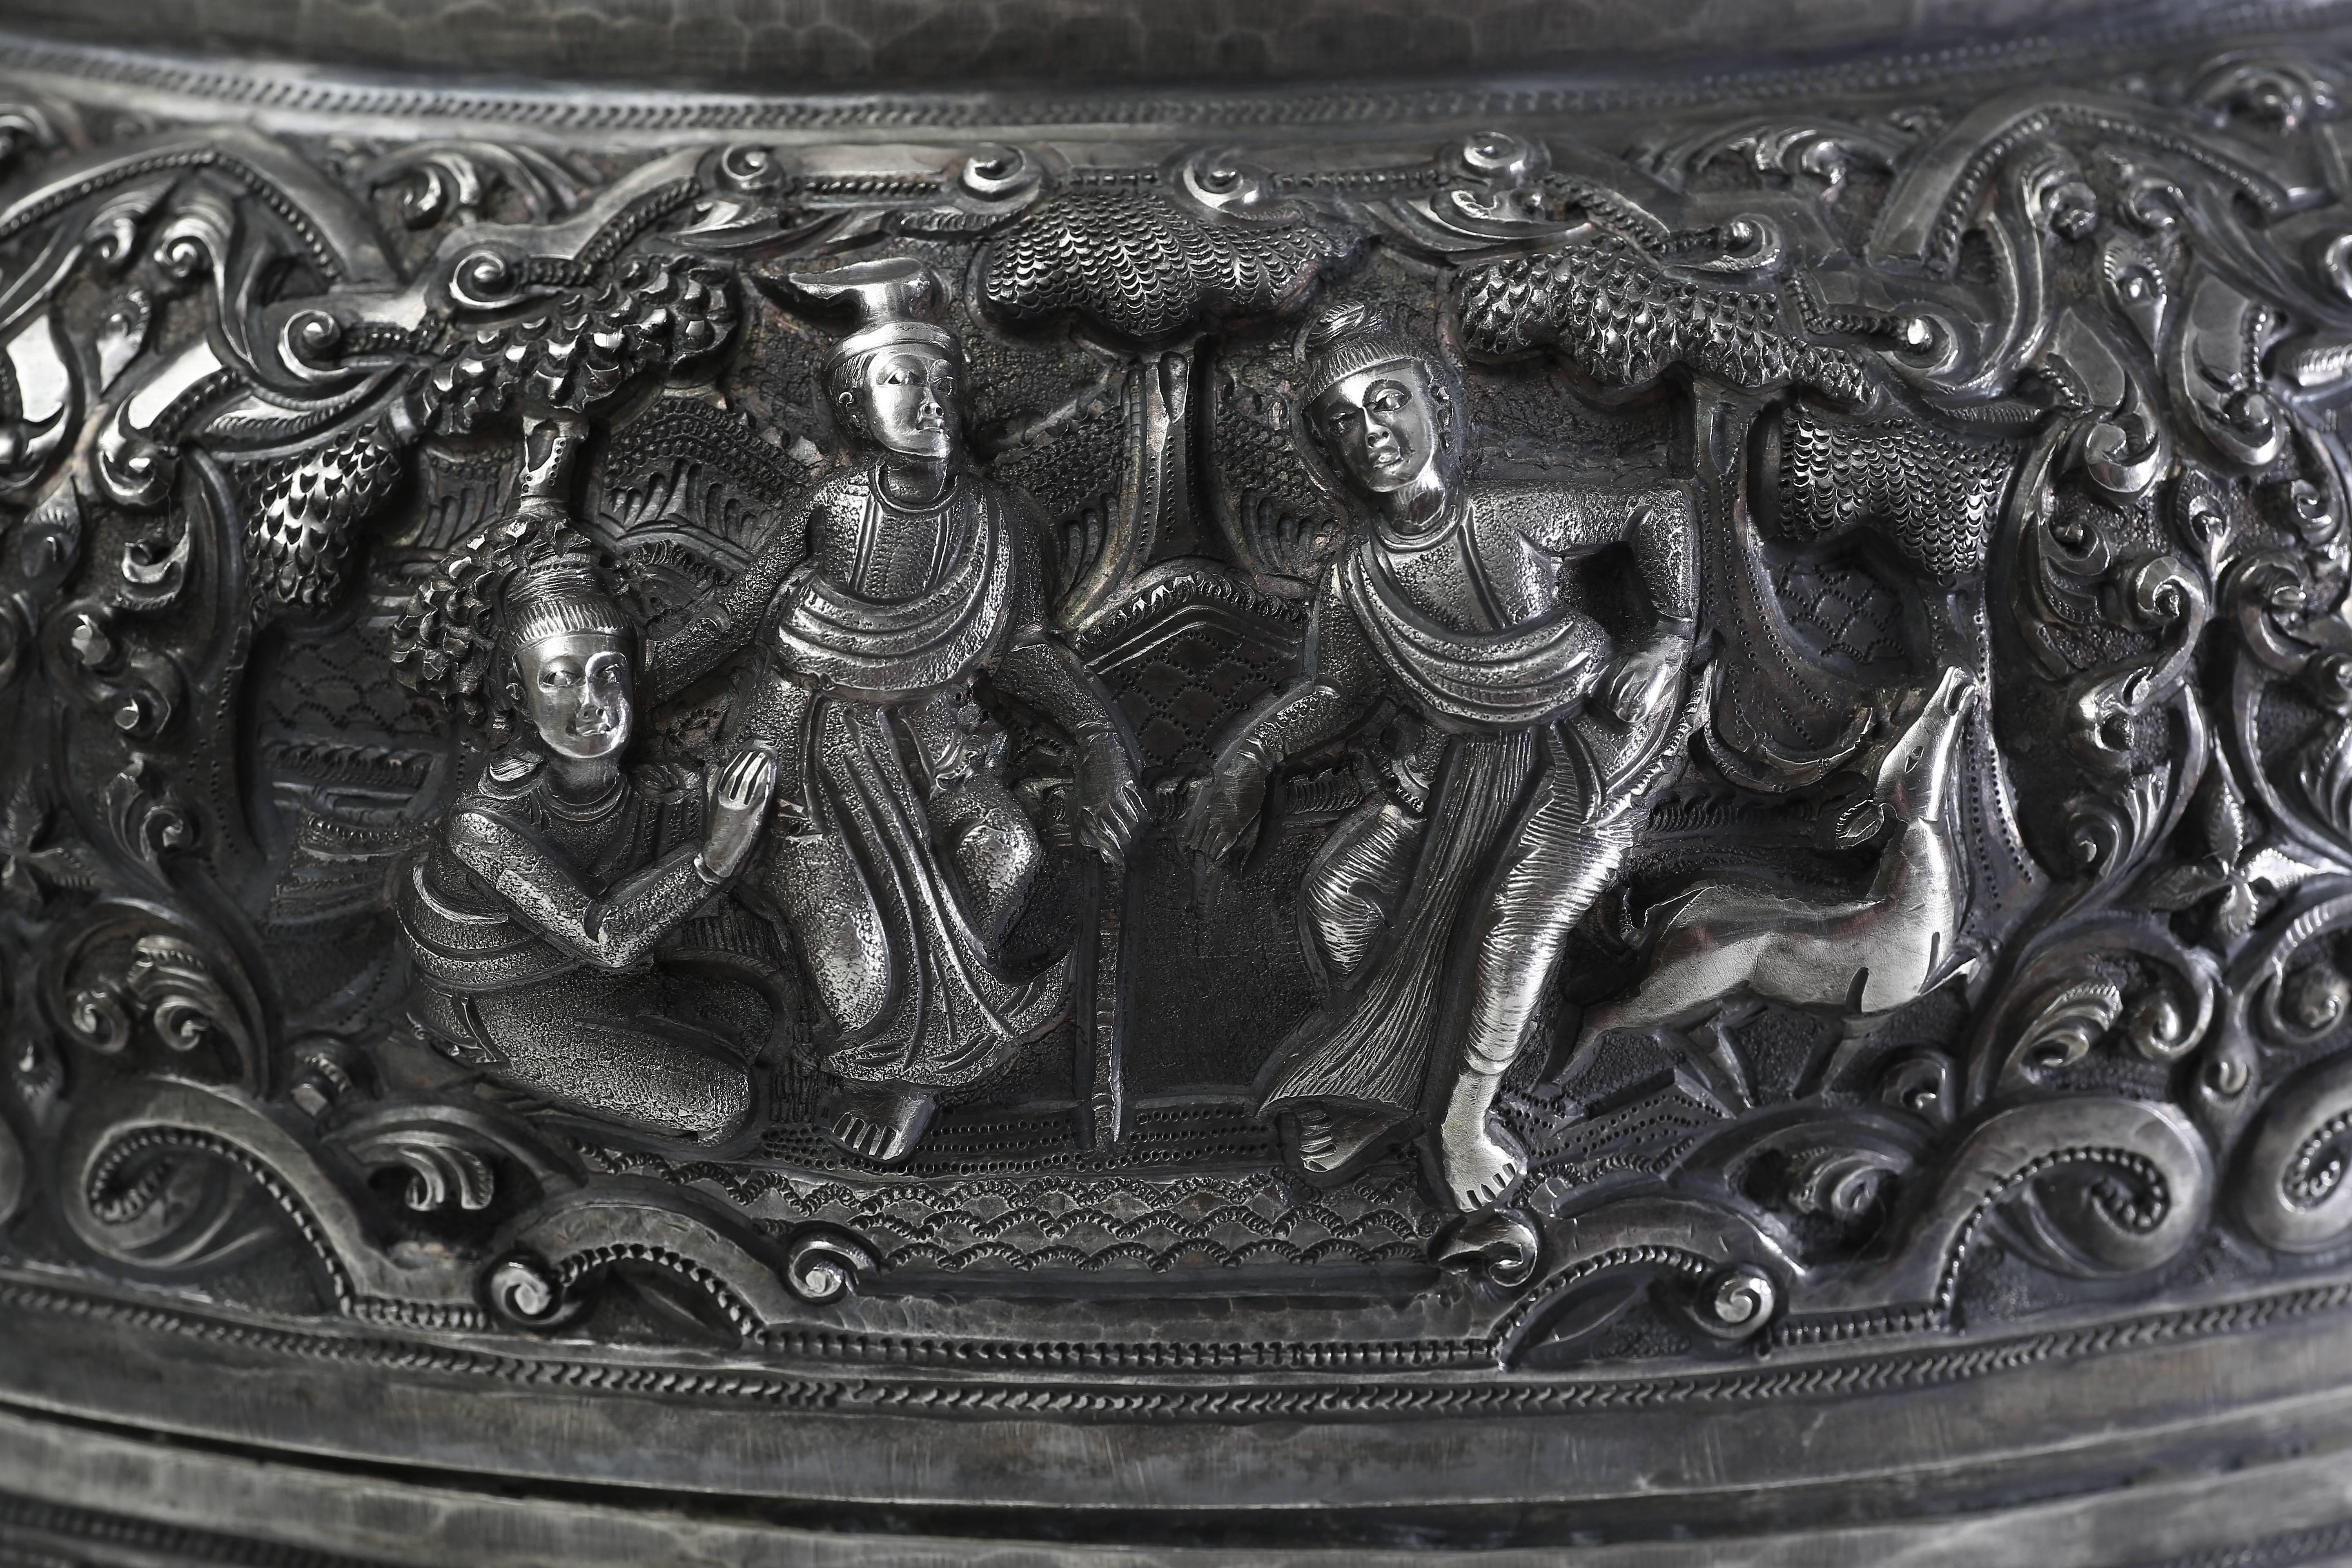 The exquisite offering vessel is finely cased with Jataka scenes in high relief.
Offering vessels, one of the most graceful of ceremonial objects, were reserved for religions use. Covered vessels of this type were traditionally used to carry